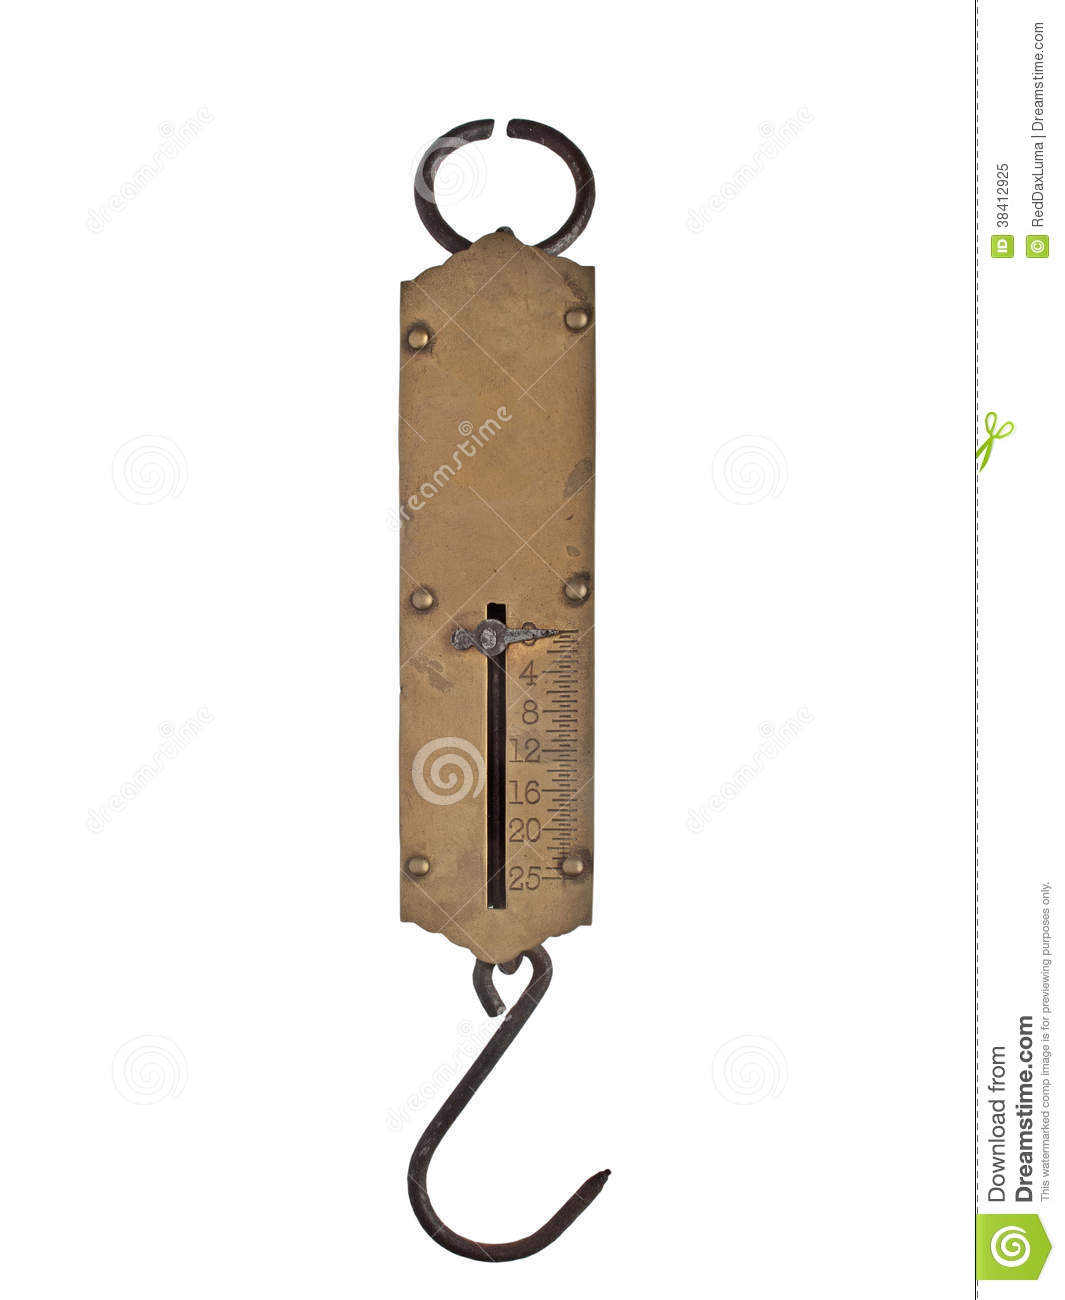 Spring Scale Clipart Vintage Brass Spring Scale